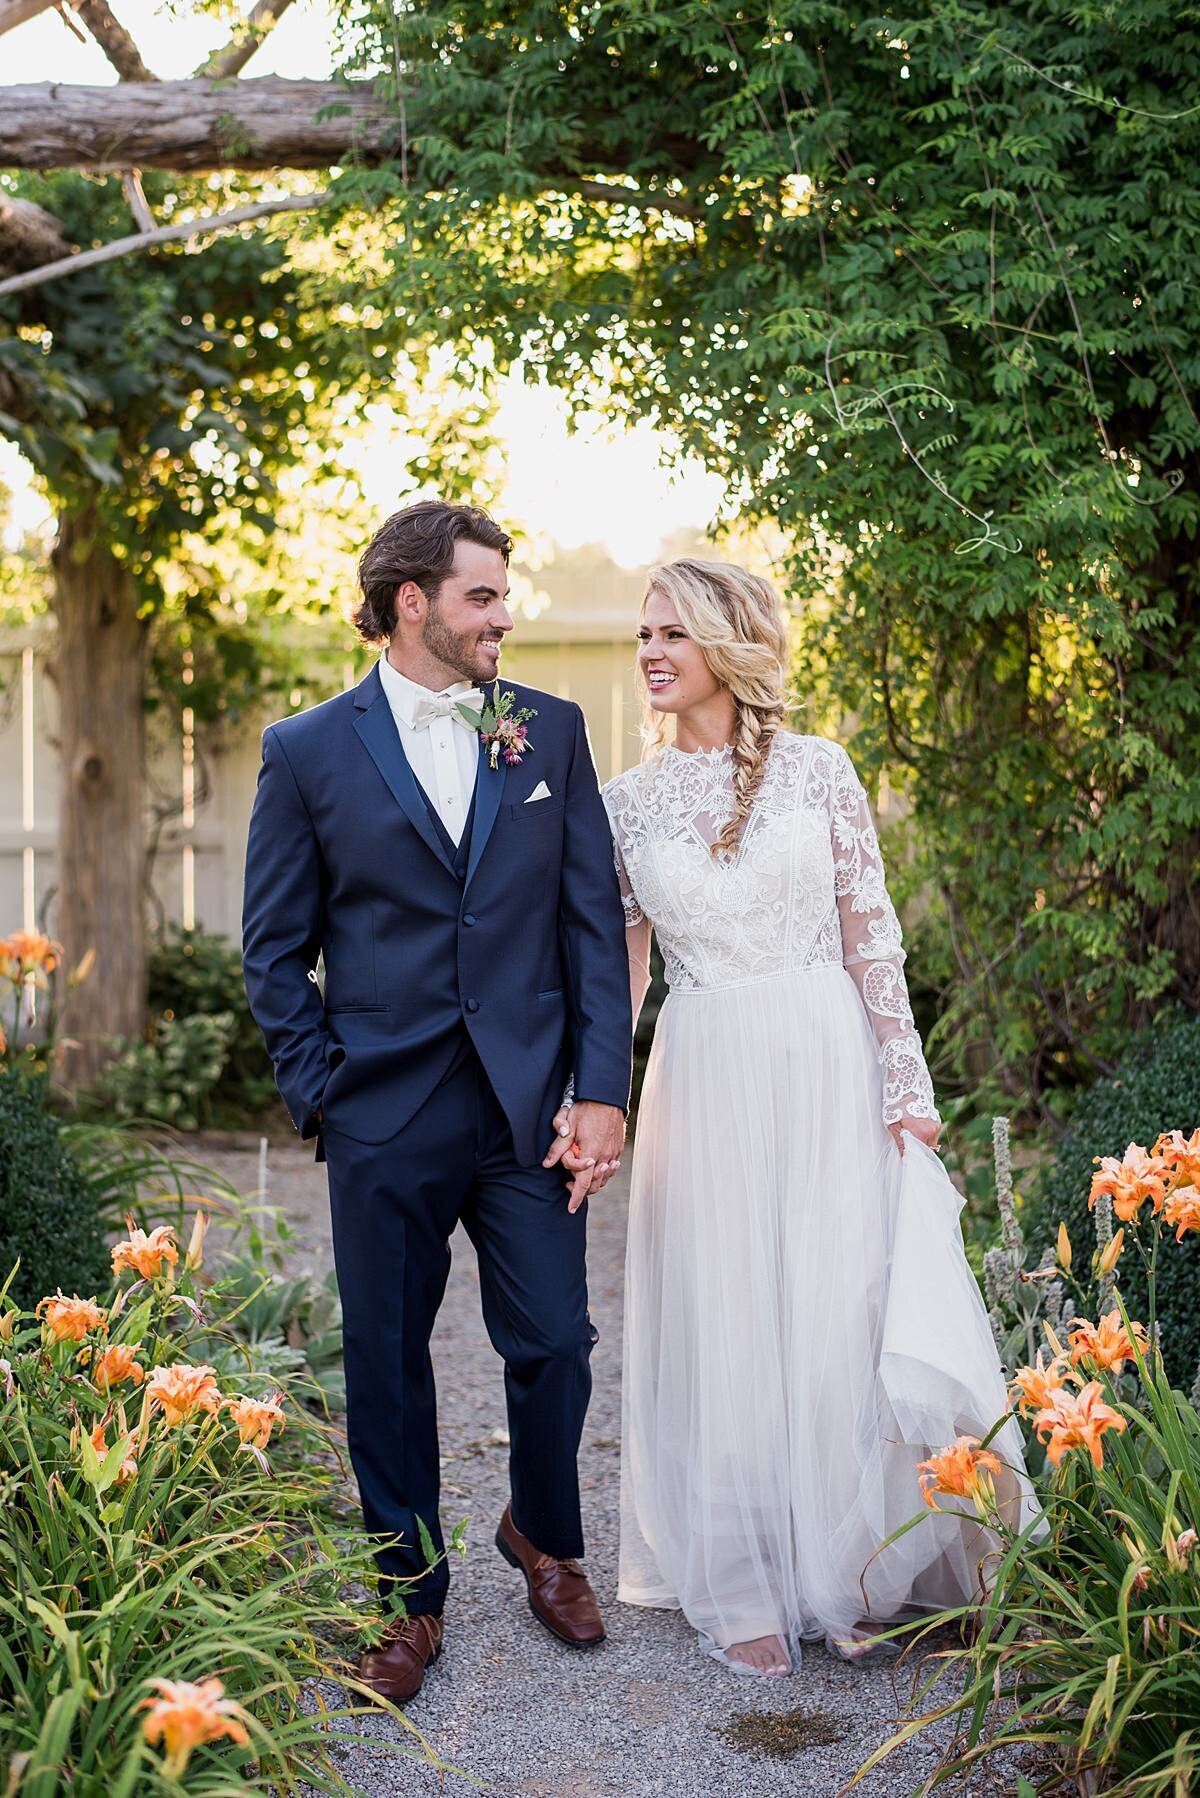 The groom, wearing a navy suit and mauve boutonniere leads the bride, wearing a boho lace gown through the garden filled with orange lilies